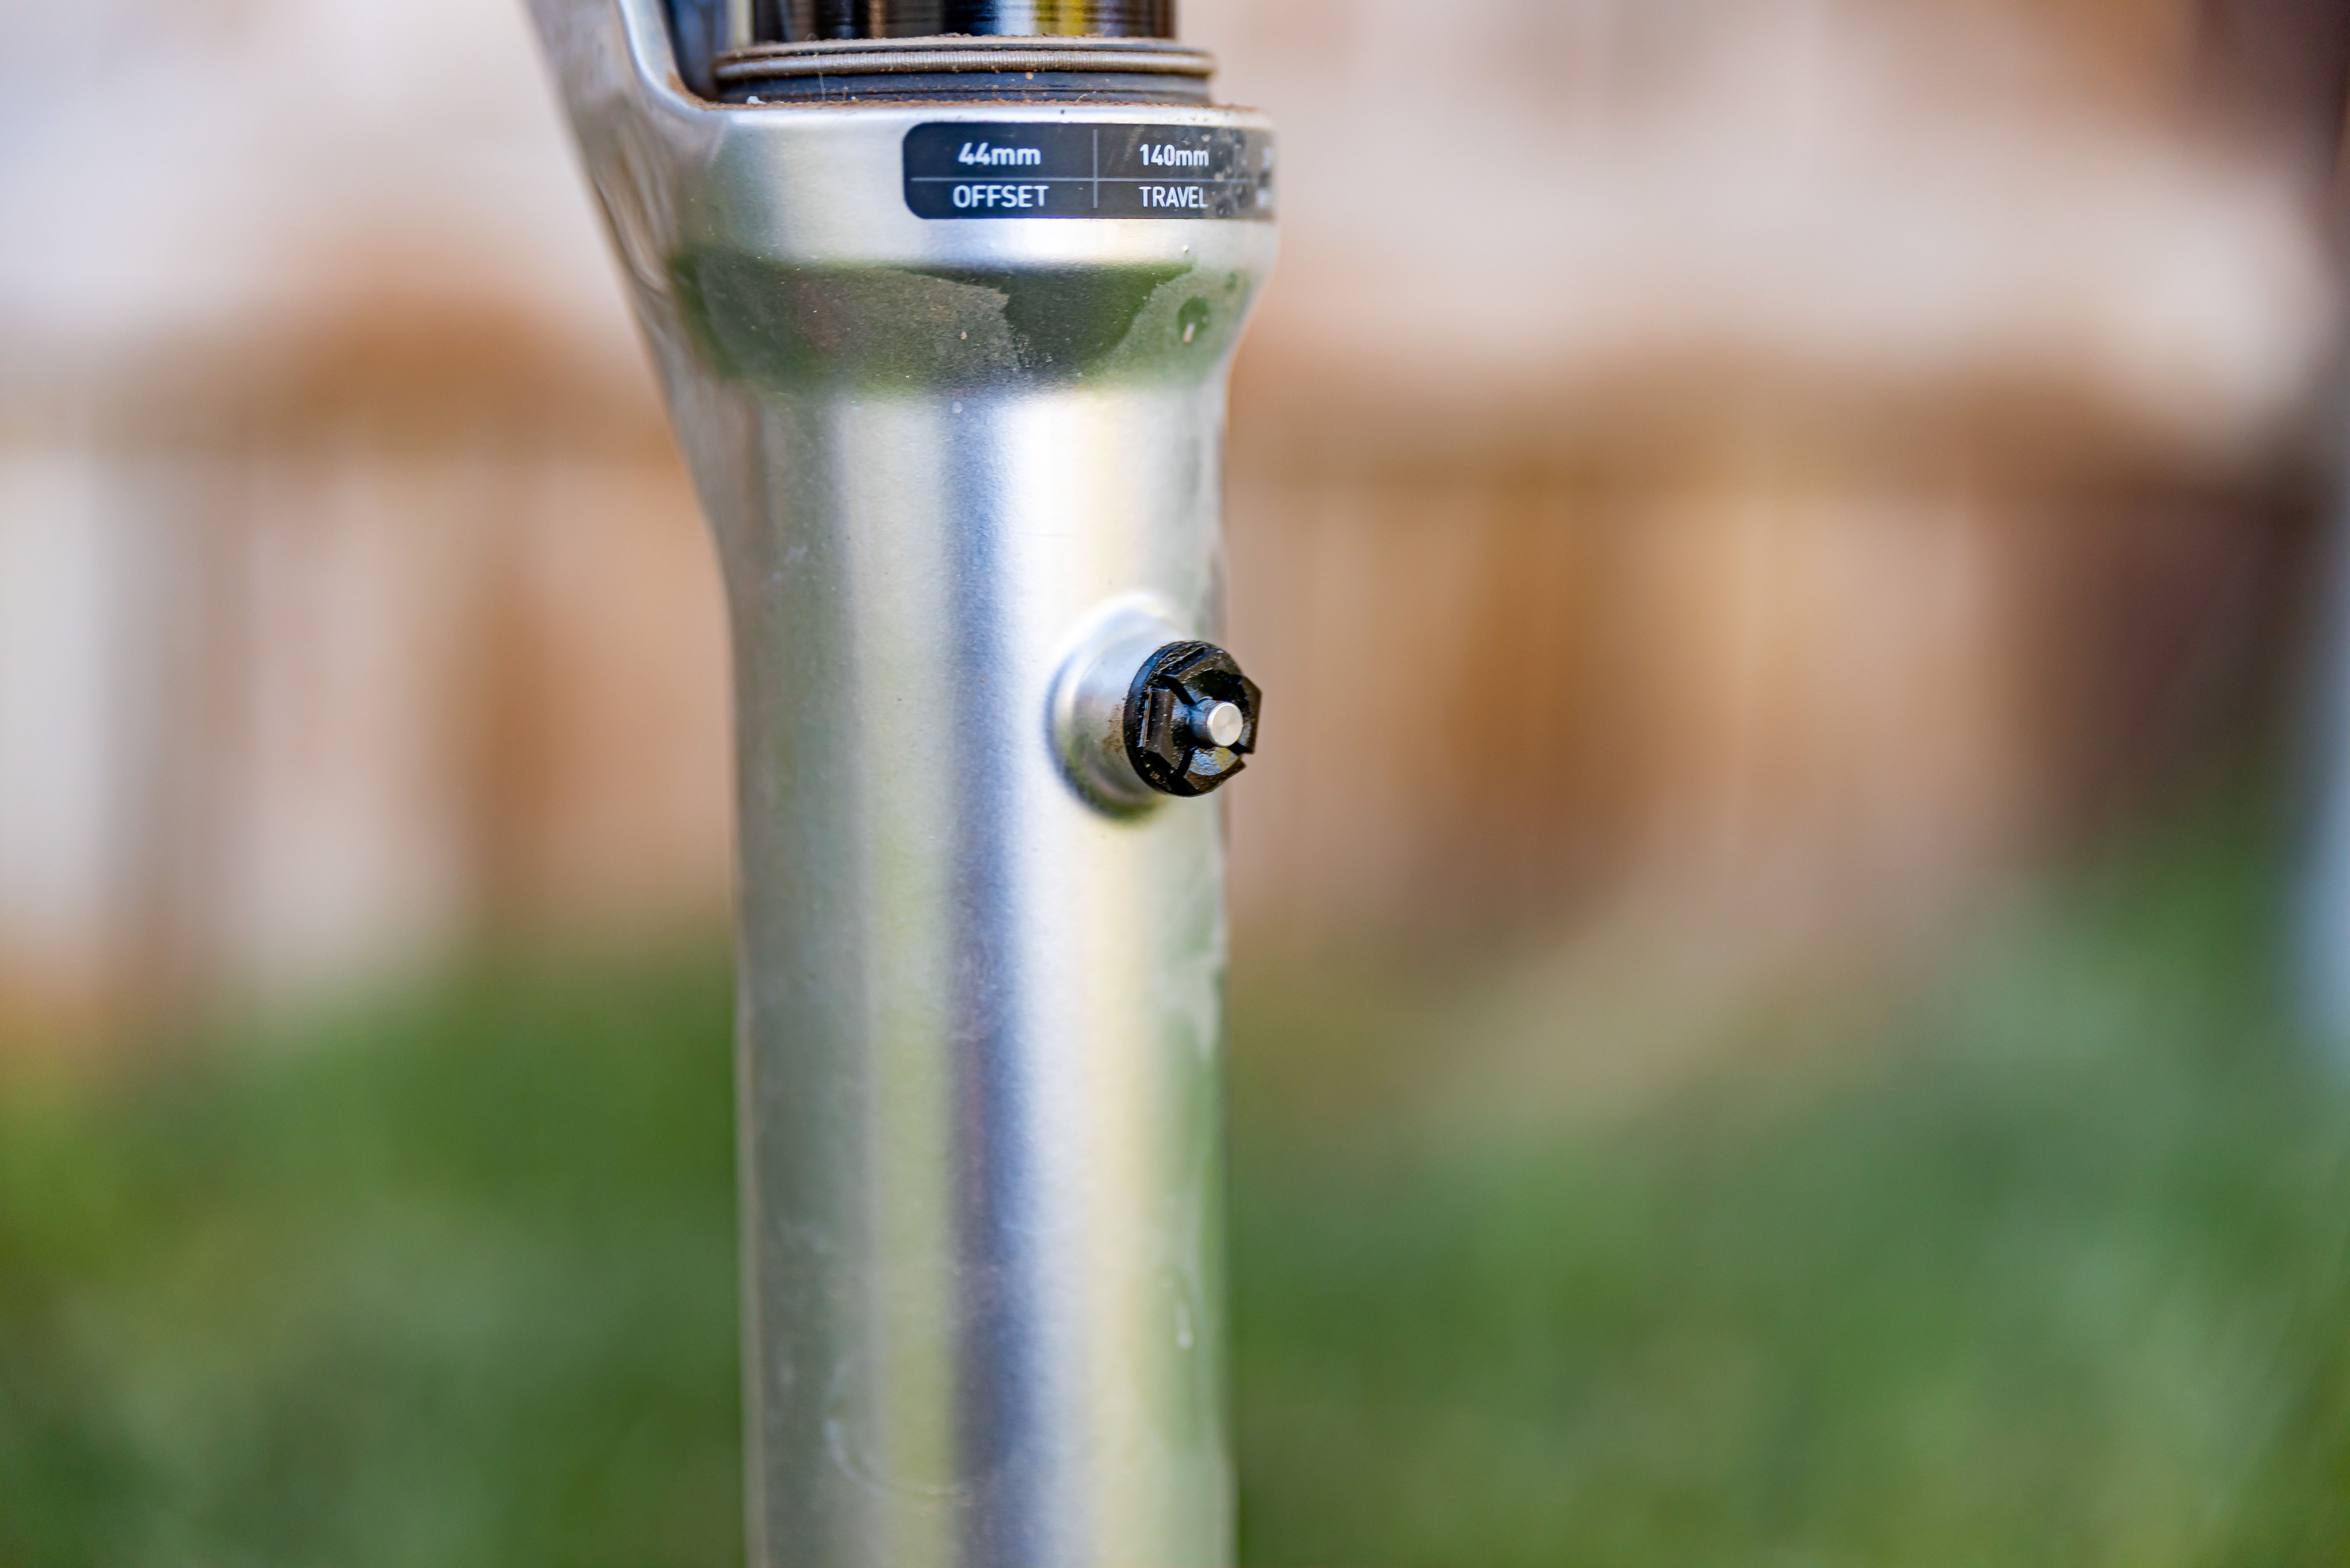 Pressure relief valves help achieve consistent feel with big changes in elevation or weather. 